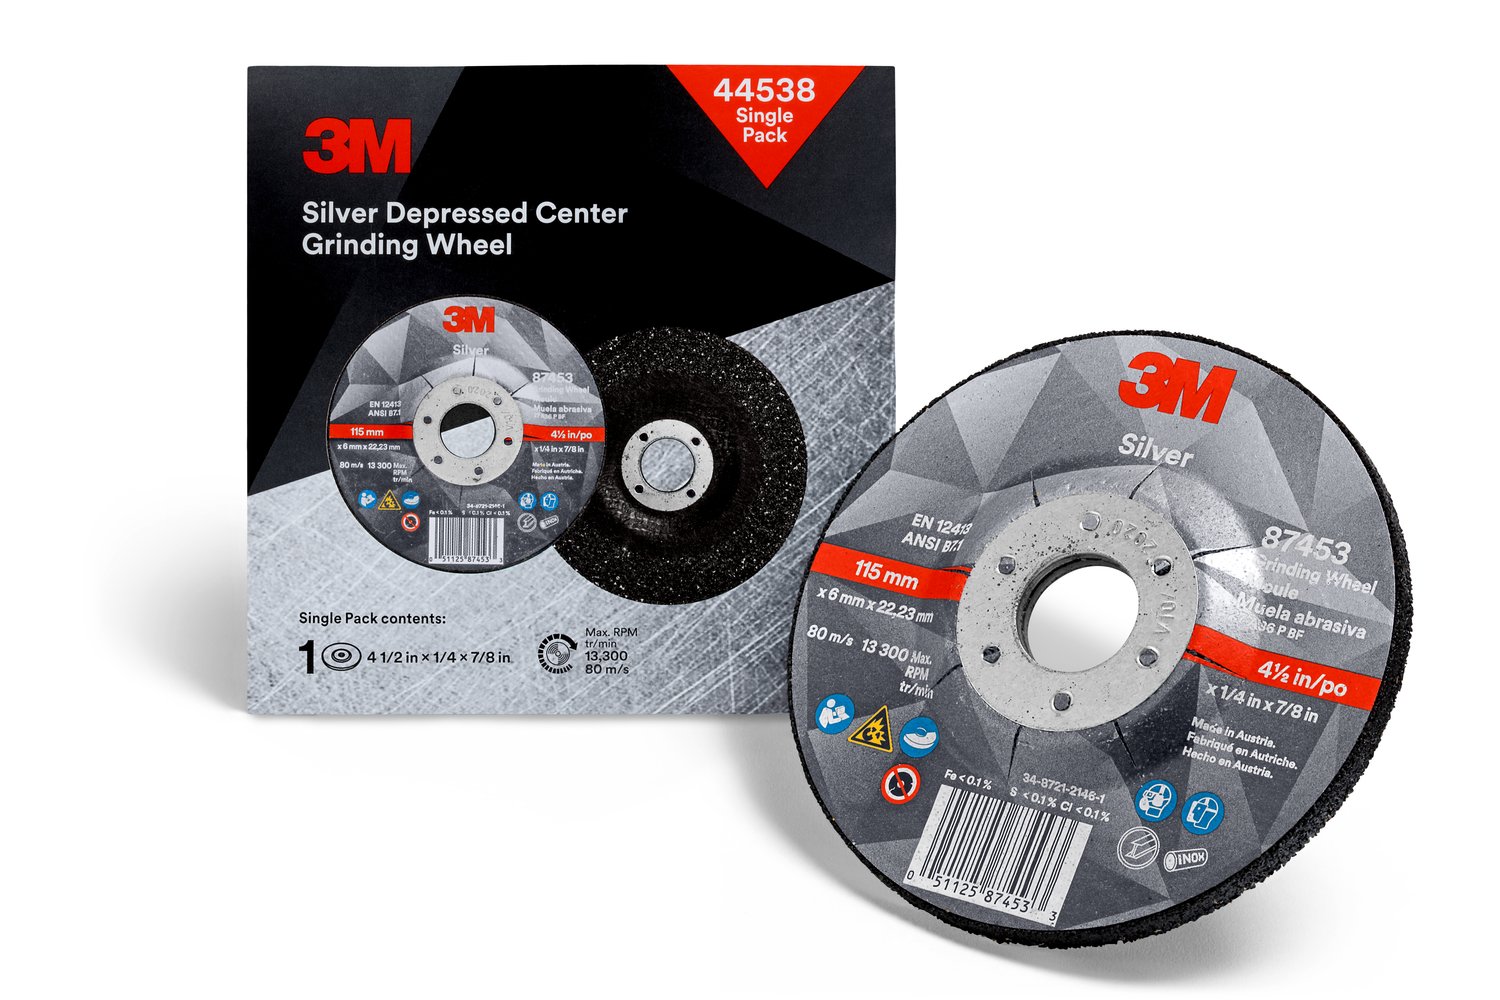 7100147339 - 3M Silver Depressed Center Grinding Wheel, 44538, T27, 4.5 in x 1/4 in
x 7/8 in, Single Pack, 10 ea/Case